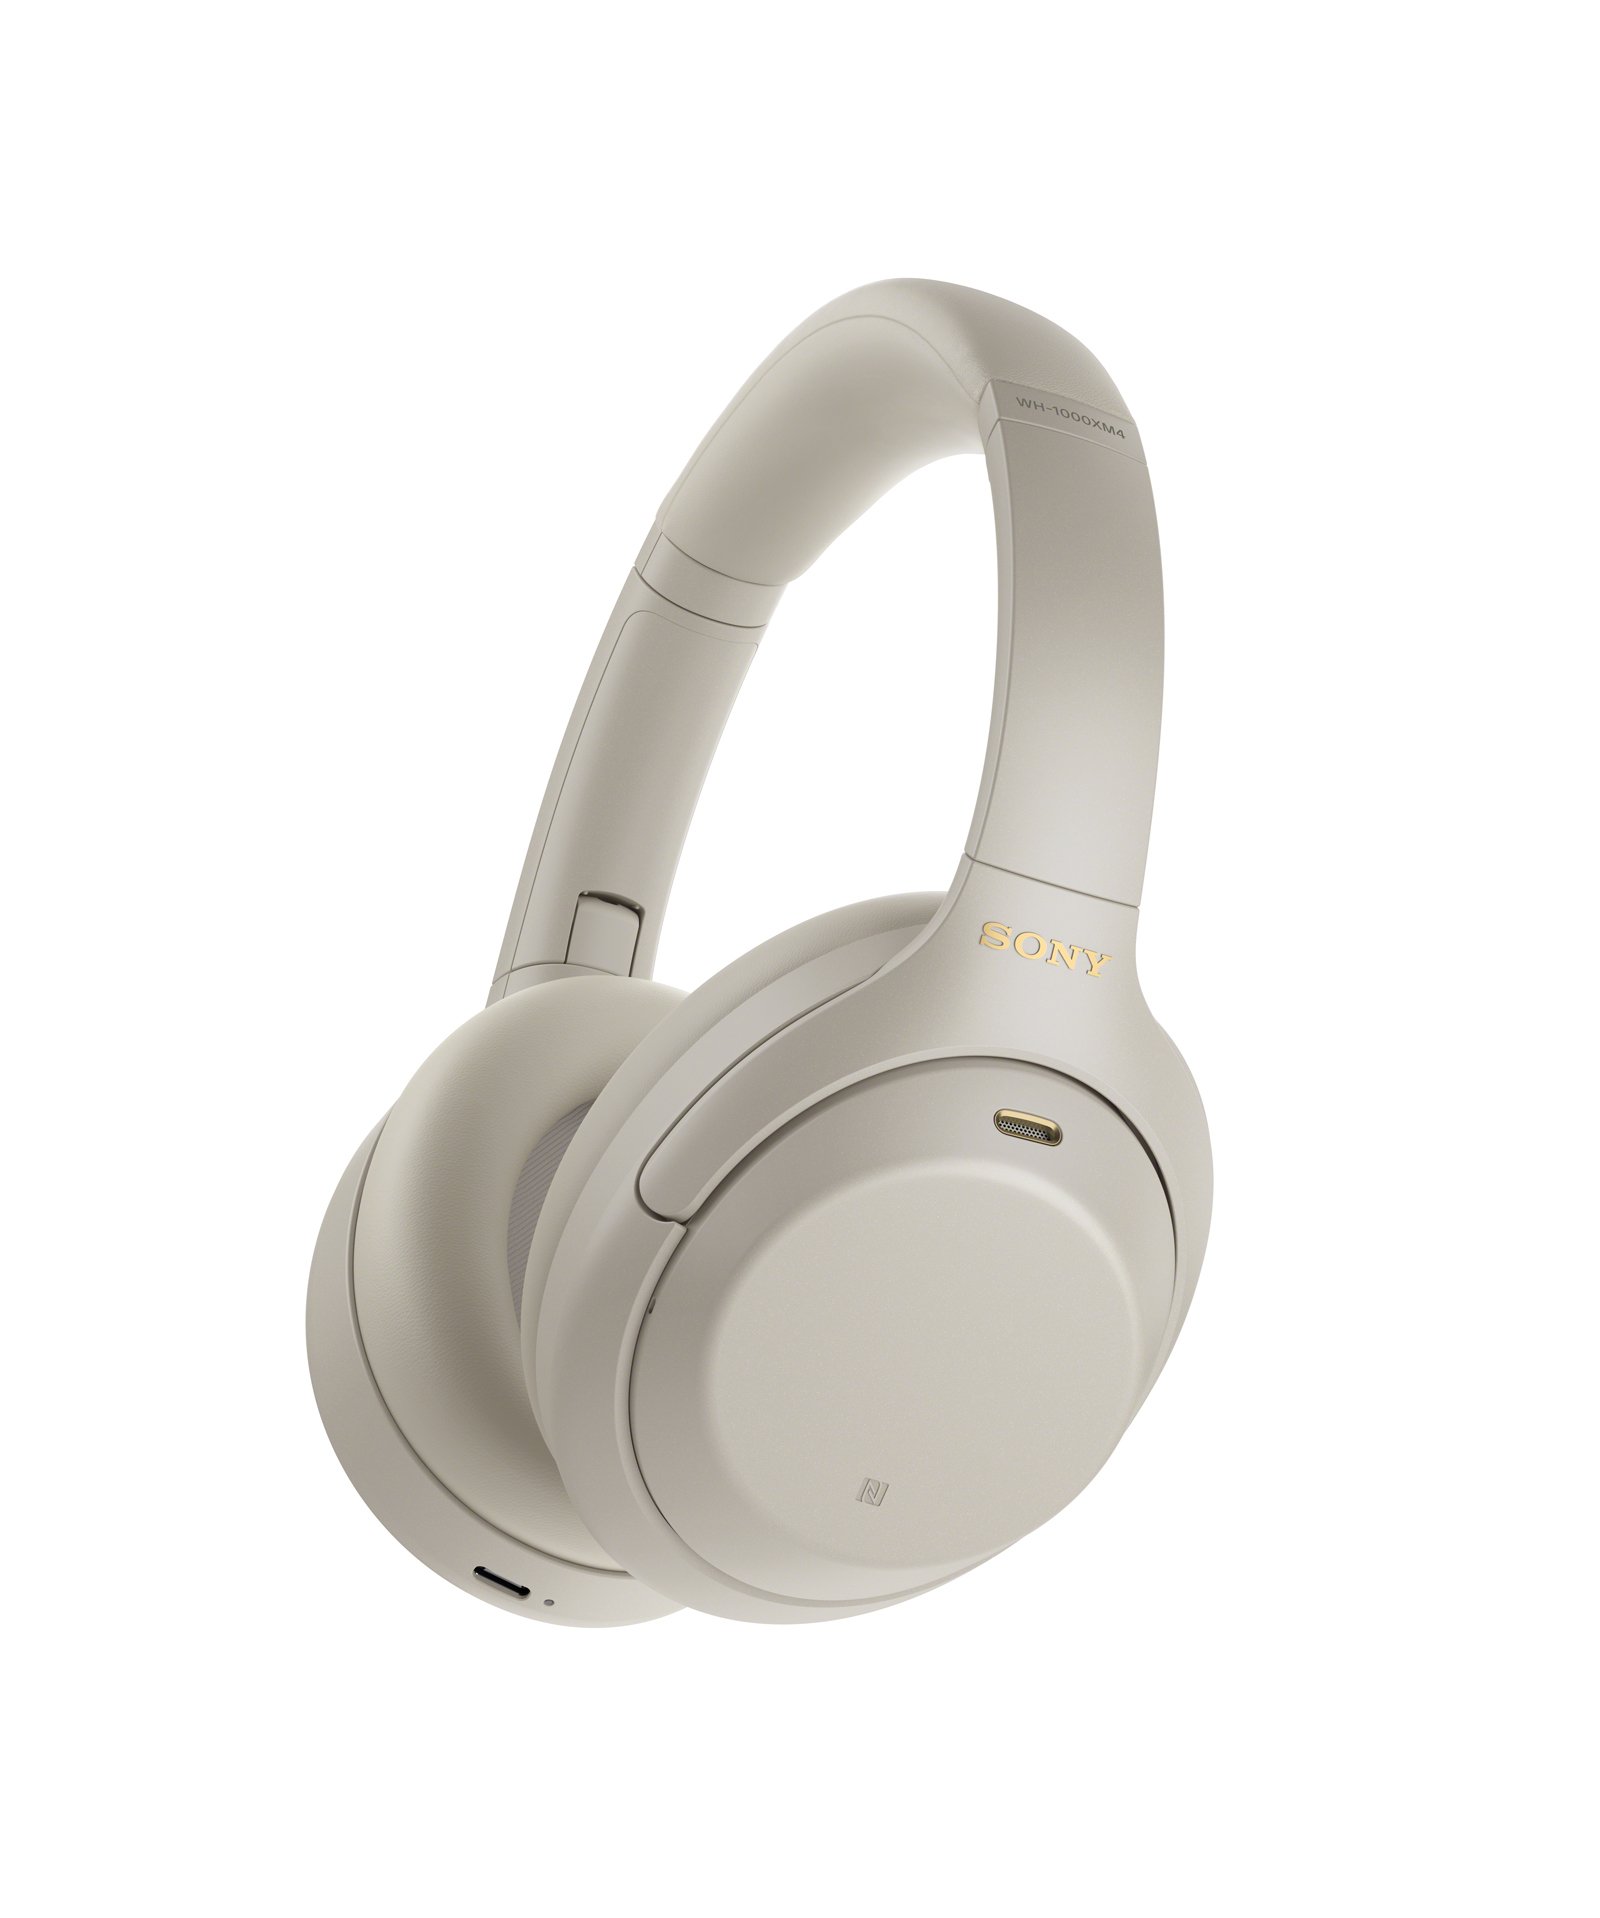 Sony Headset 1000X4S / WH1000XM4S.CE7 Silber